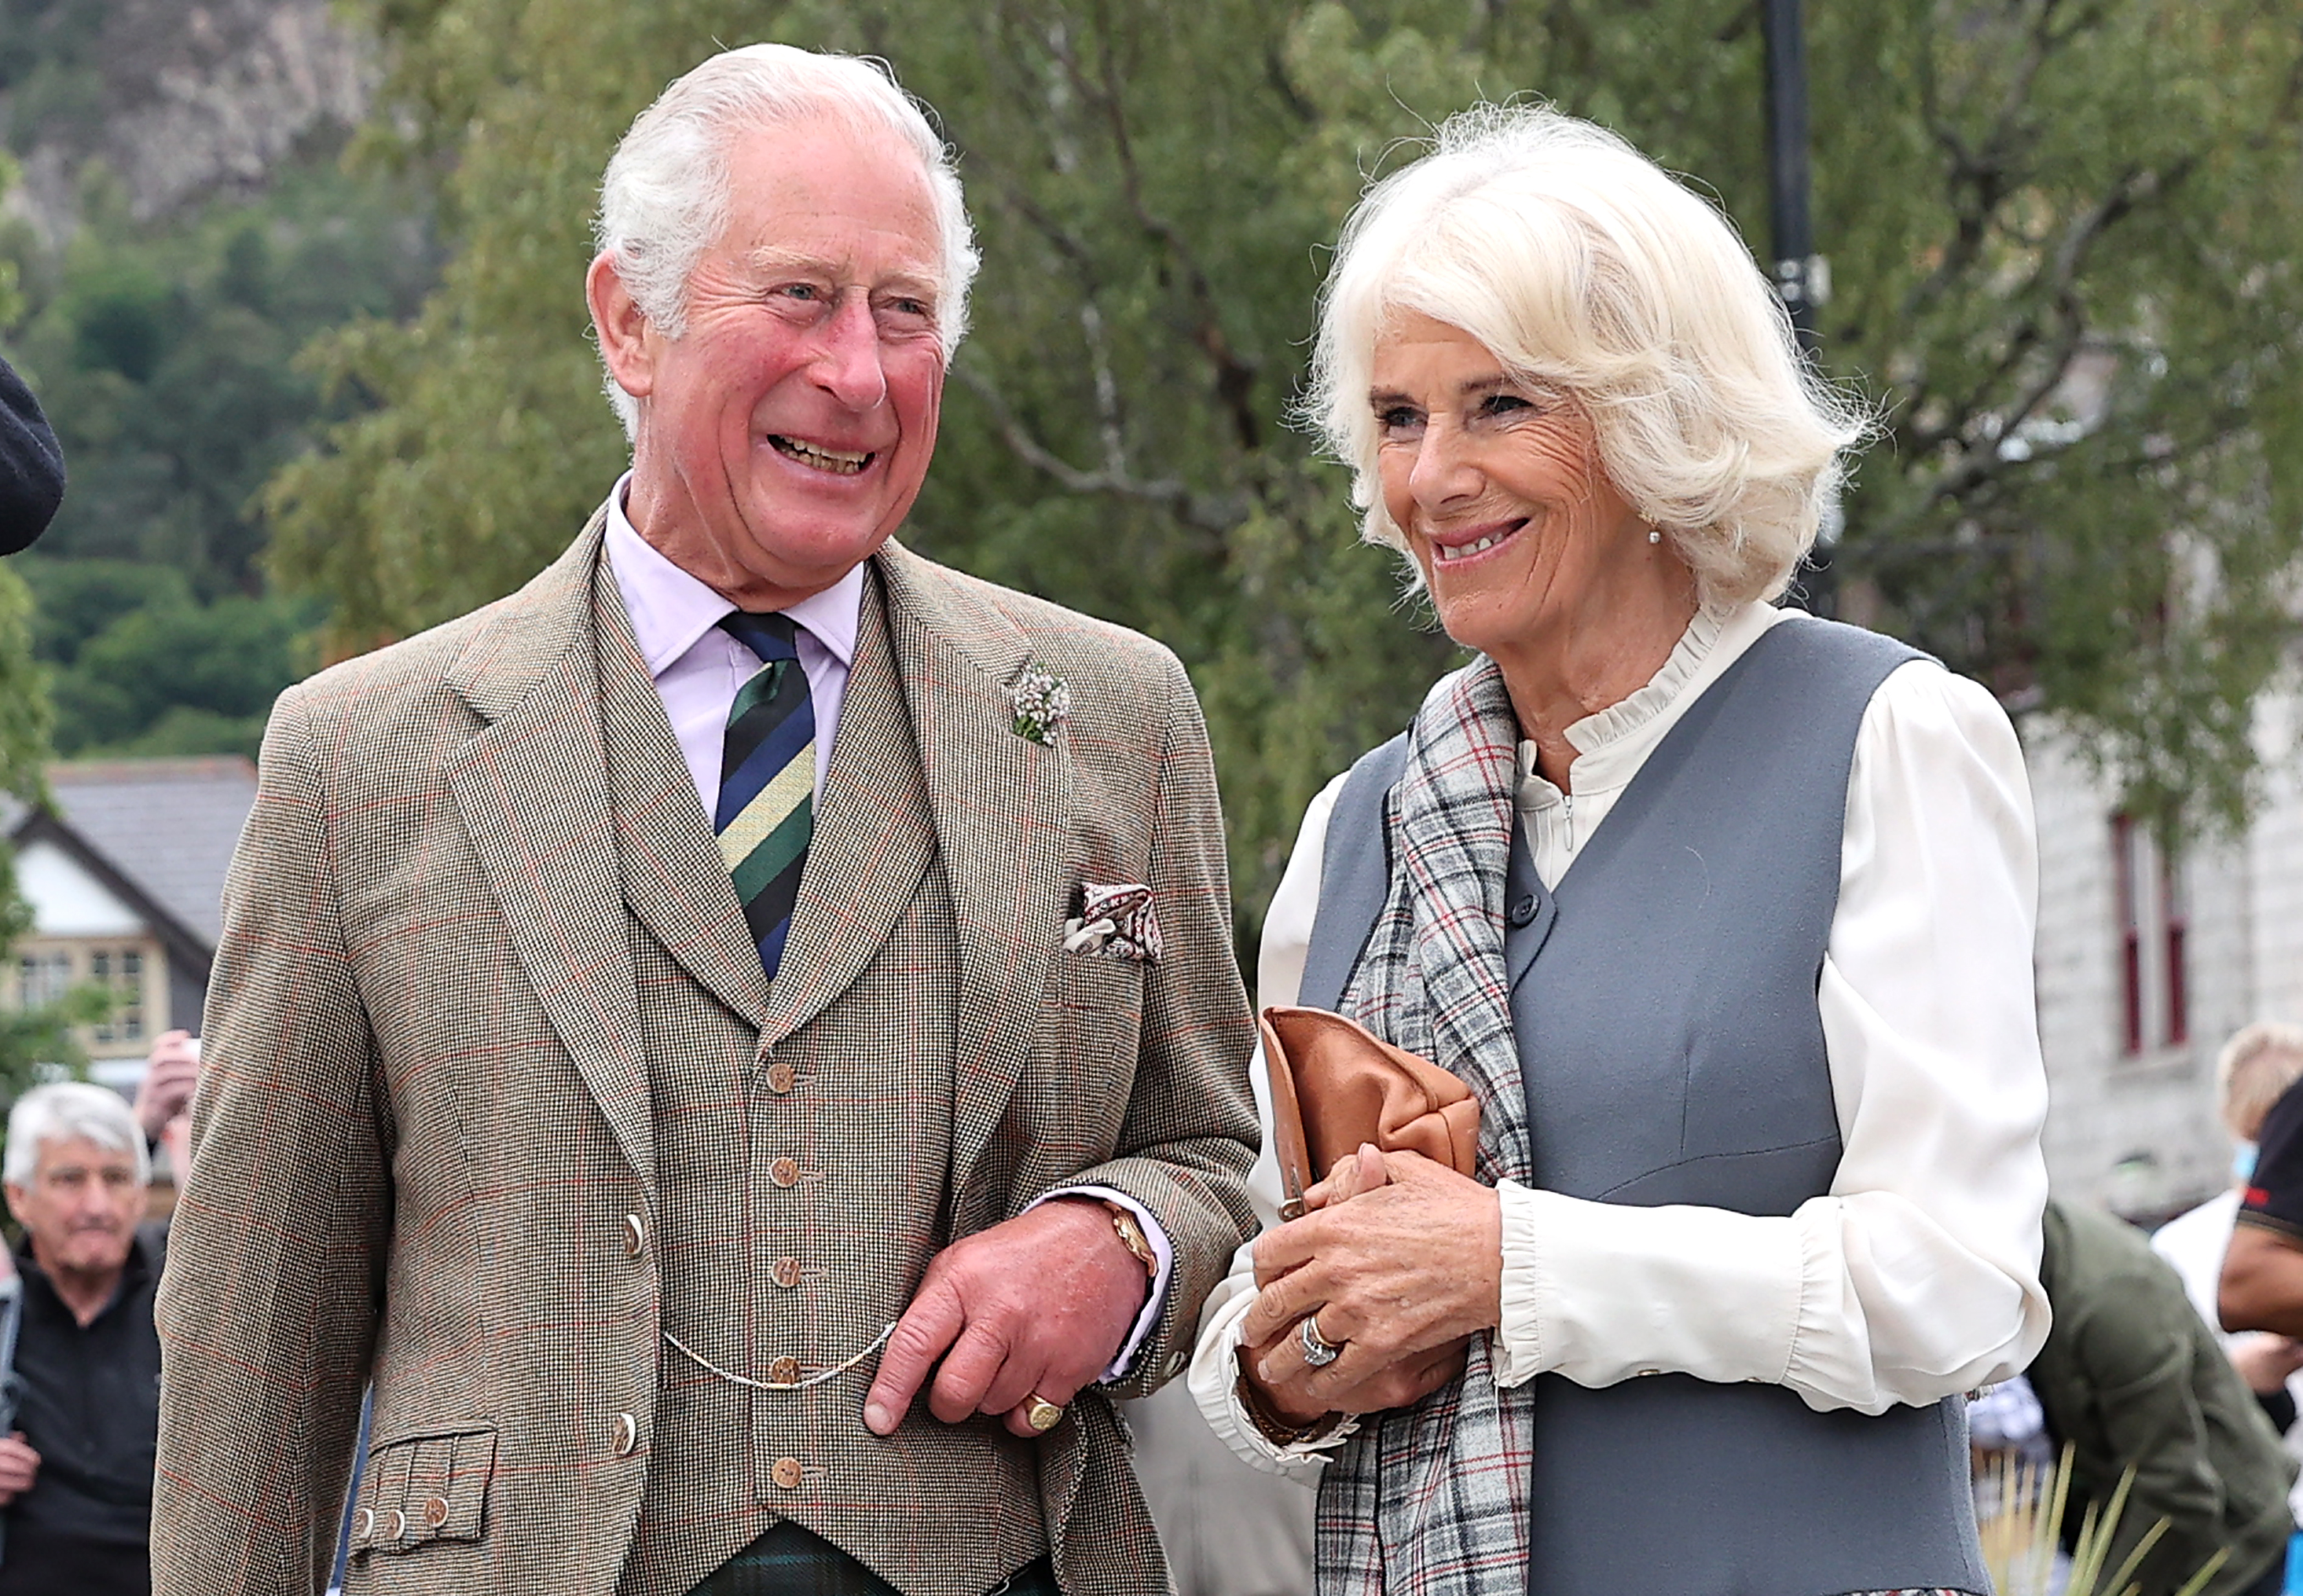 Prince Charles, Prince of Wales, and Camilla, Duchess of Cornwall, smile as they visit local shops and businesses during a short walk through the village in Ballater, Scotland, on August 31, 2021. | Source: Getty Images